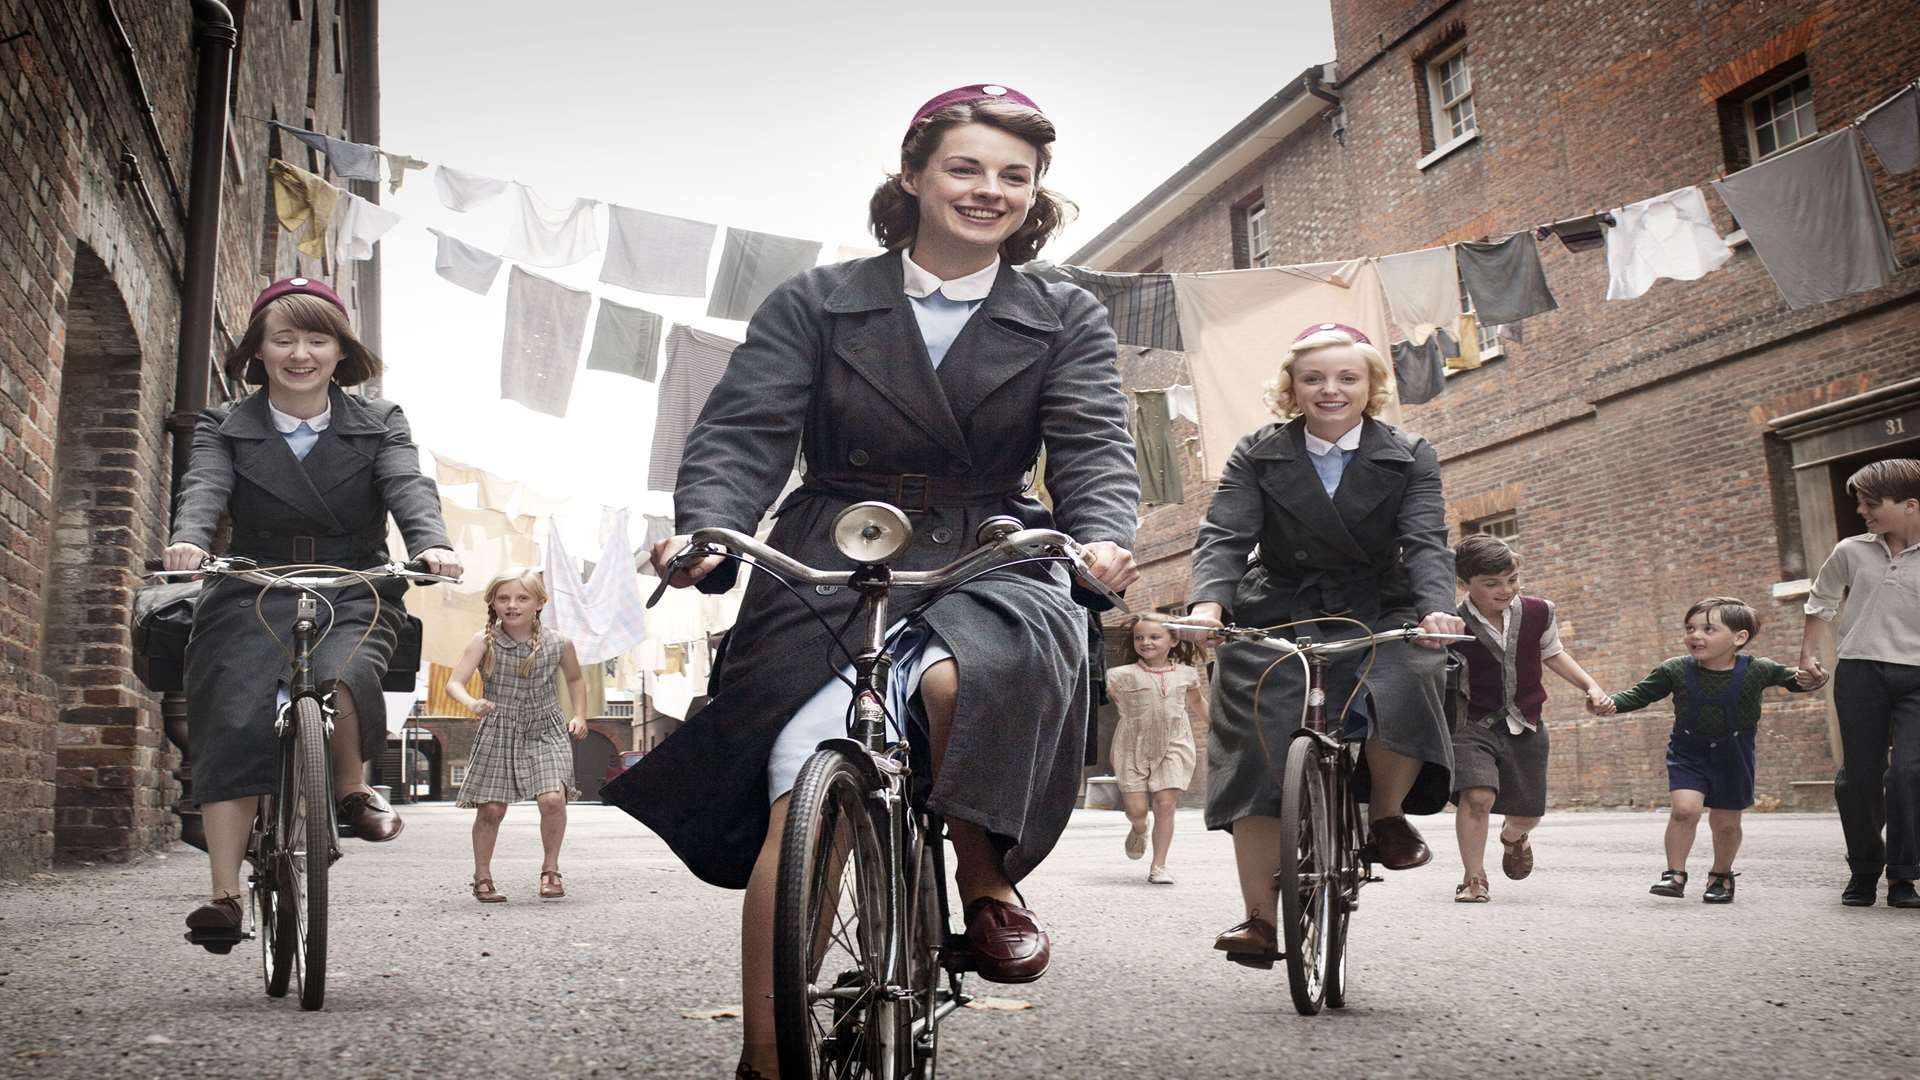 Call the Midwife was shot at Chatham's Historic Dockyard. Picture: Laurence Cendrowicz